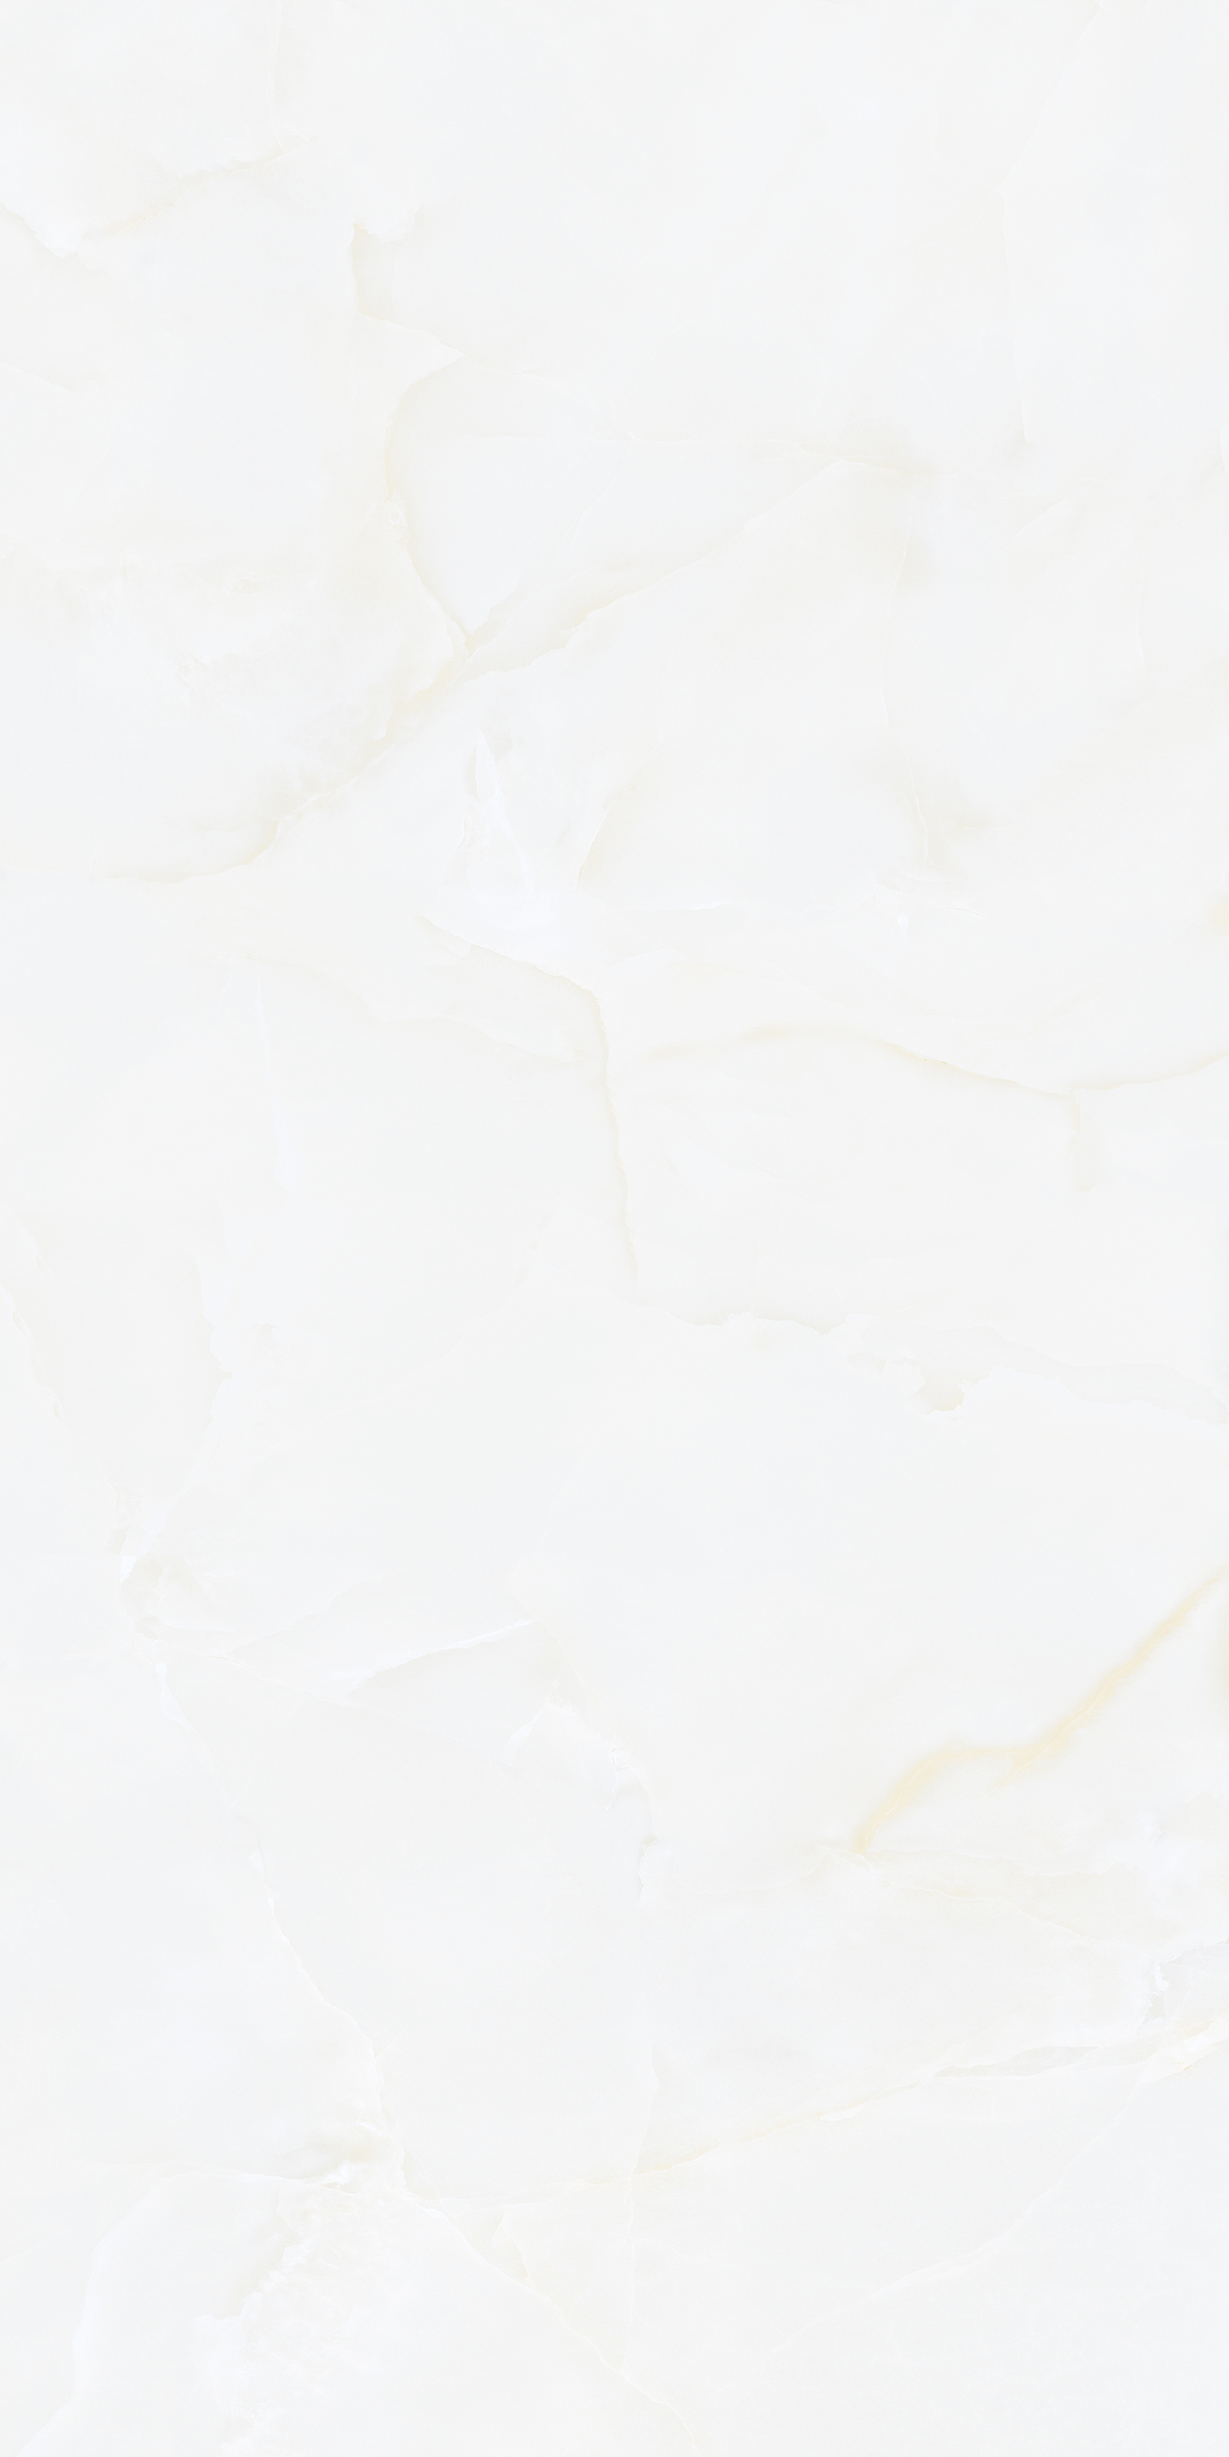 Polished Light Marble Texture Background, High Resolution Italian Smooth Onyx Marble Stone For Abstract Interior Home Decoration Used Ceramic Wall Tiles And Floor Tiles Surface Background.; Shutterstock ID 1809170302; purchase_order: -; job: -; Name of competition (if applicable): -; other: -